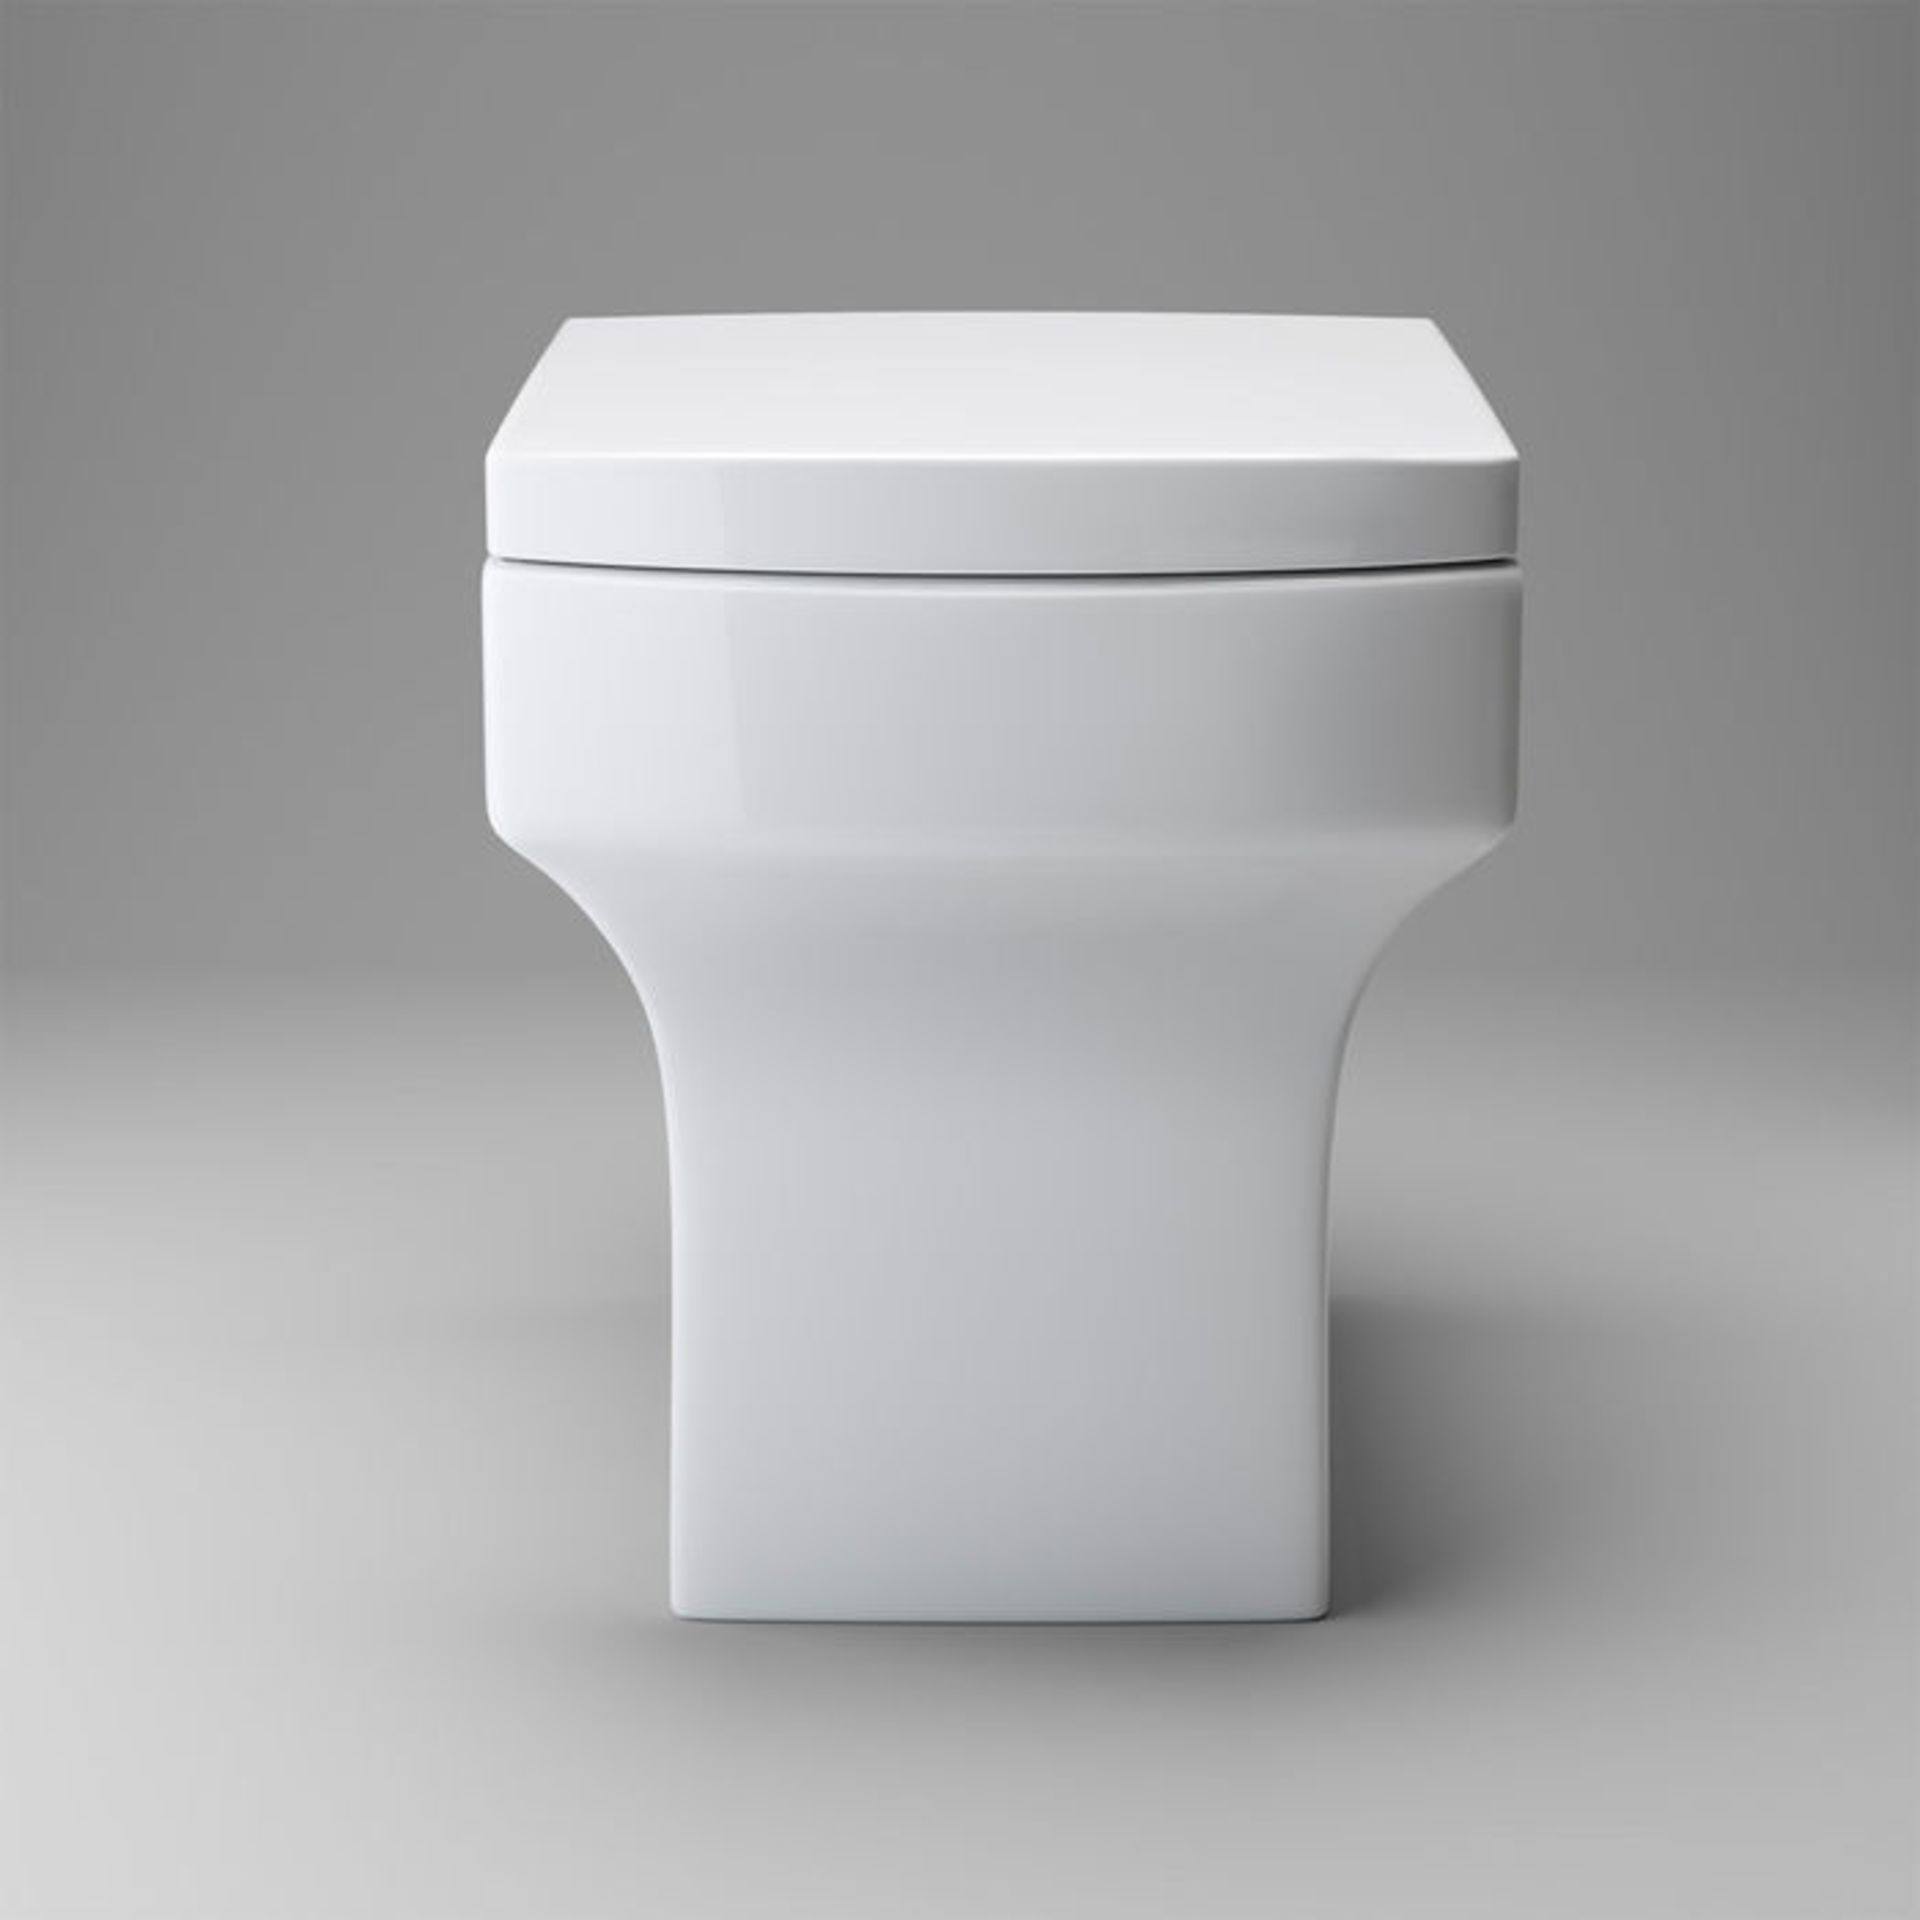 (ZL180) Belfort Back to Wall Toilet inc Soft Close Seat. Made from White Vitreous China Anti-scratch - Image 4 of 4